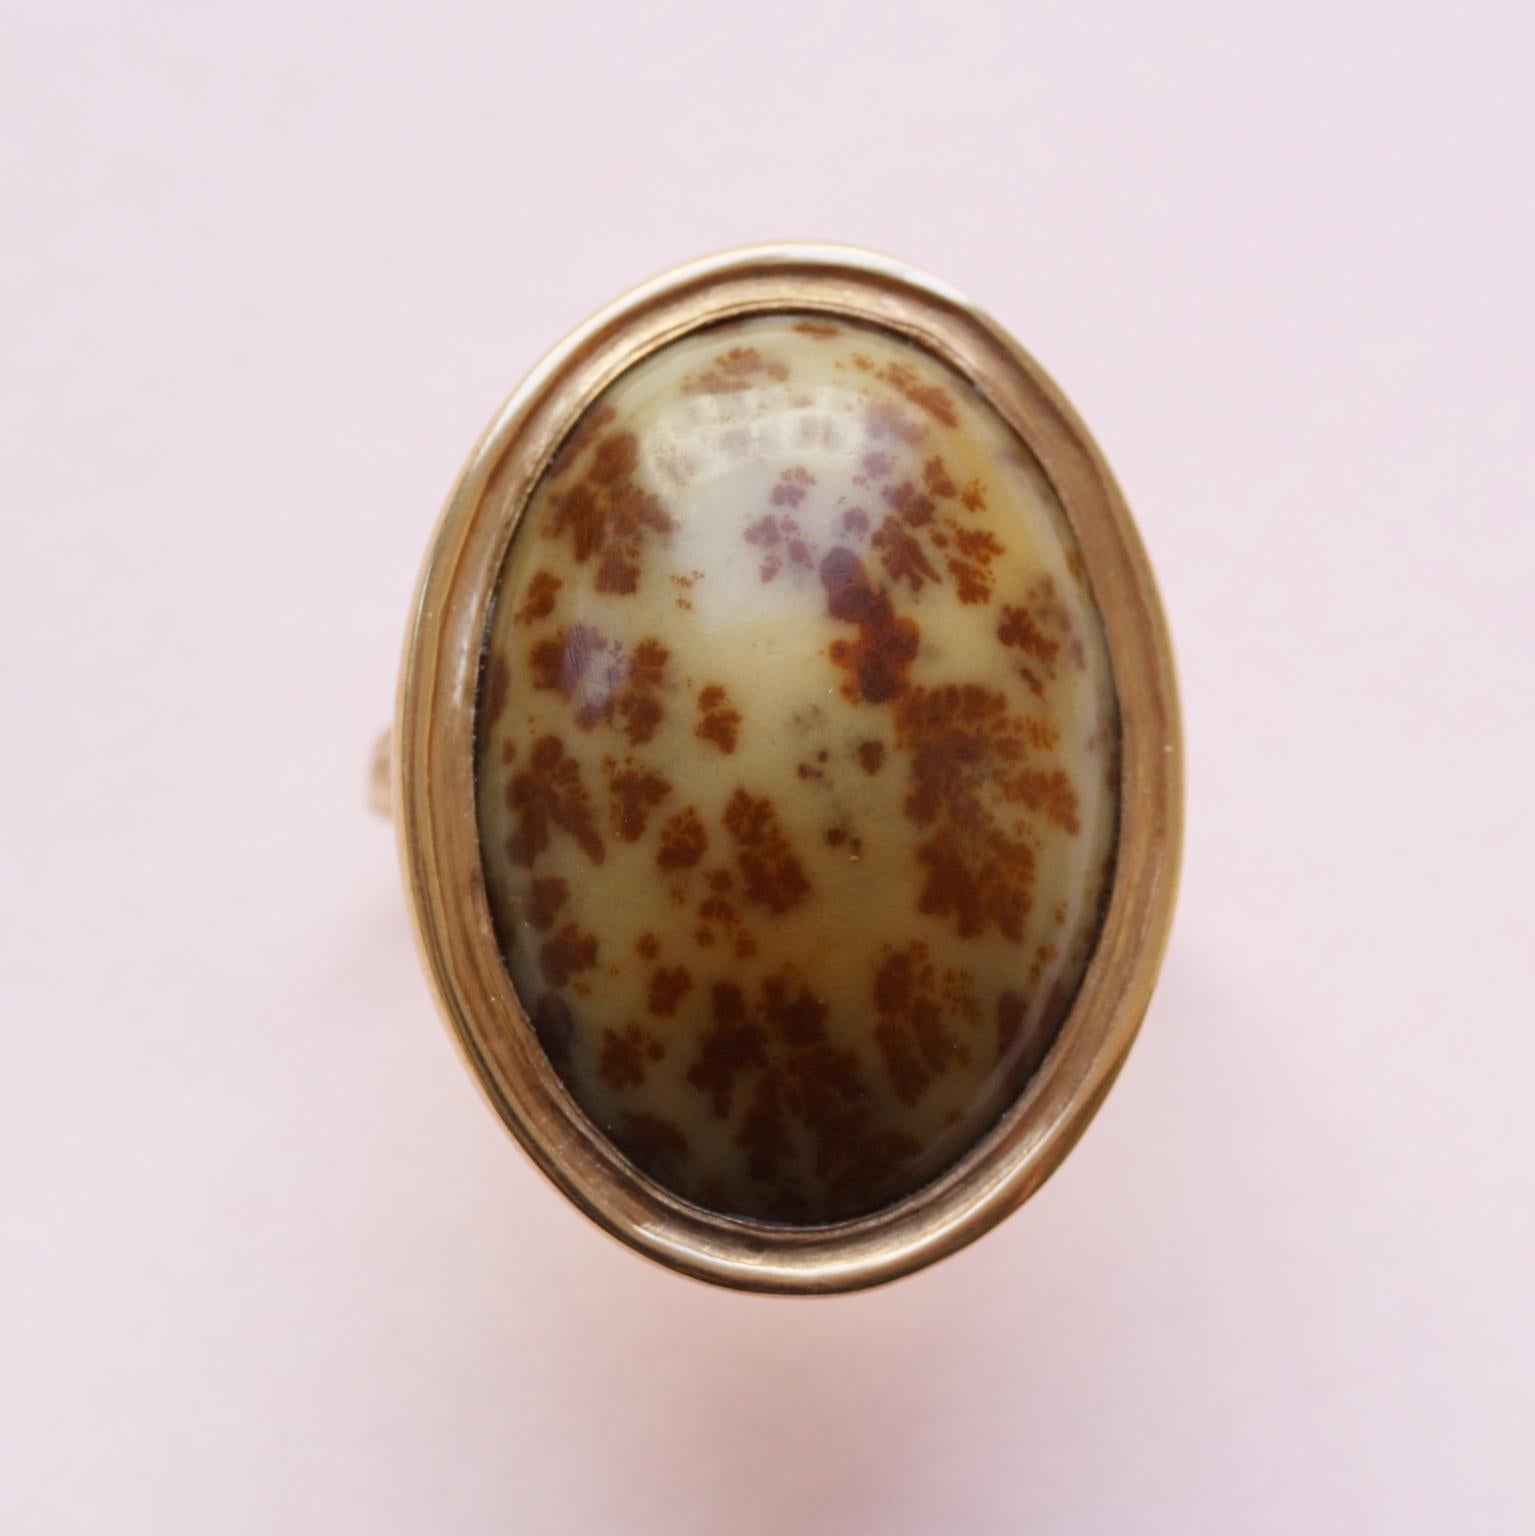 A gold ring set with an oval cabochon cut mottled Jasper - going into moss agate - 18th century, England.

ring size: 17 mm. / 6.5 US
weight: 12.58 gram.
dimensions: 1 - 25 mm.